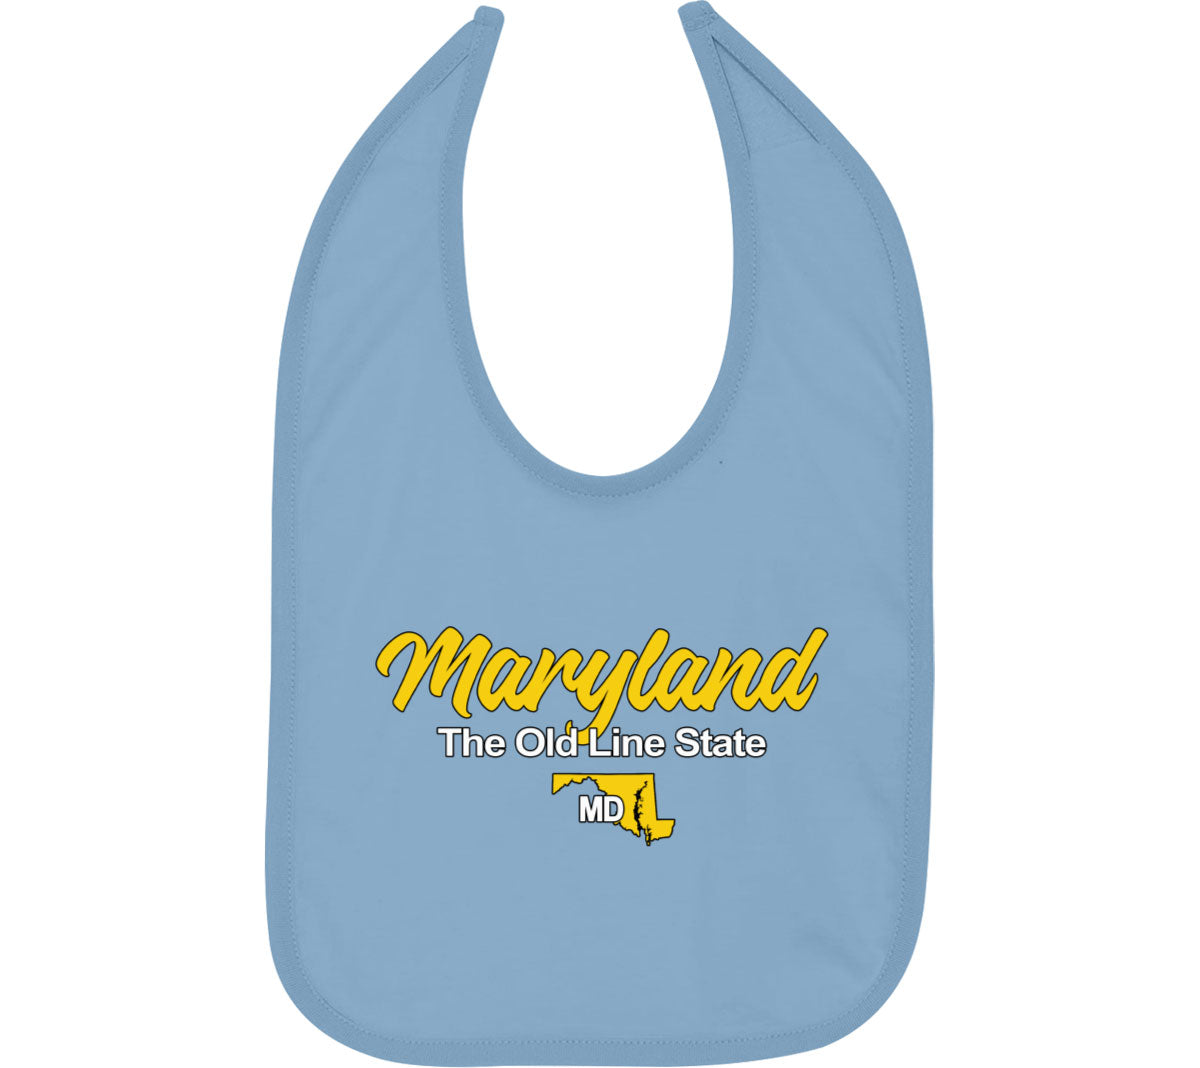 Maryland The Old Line State Baby Bib